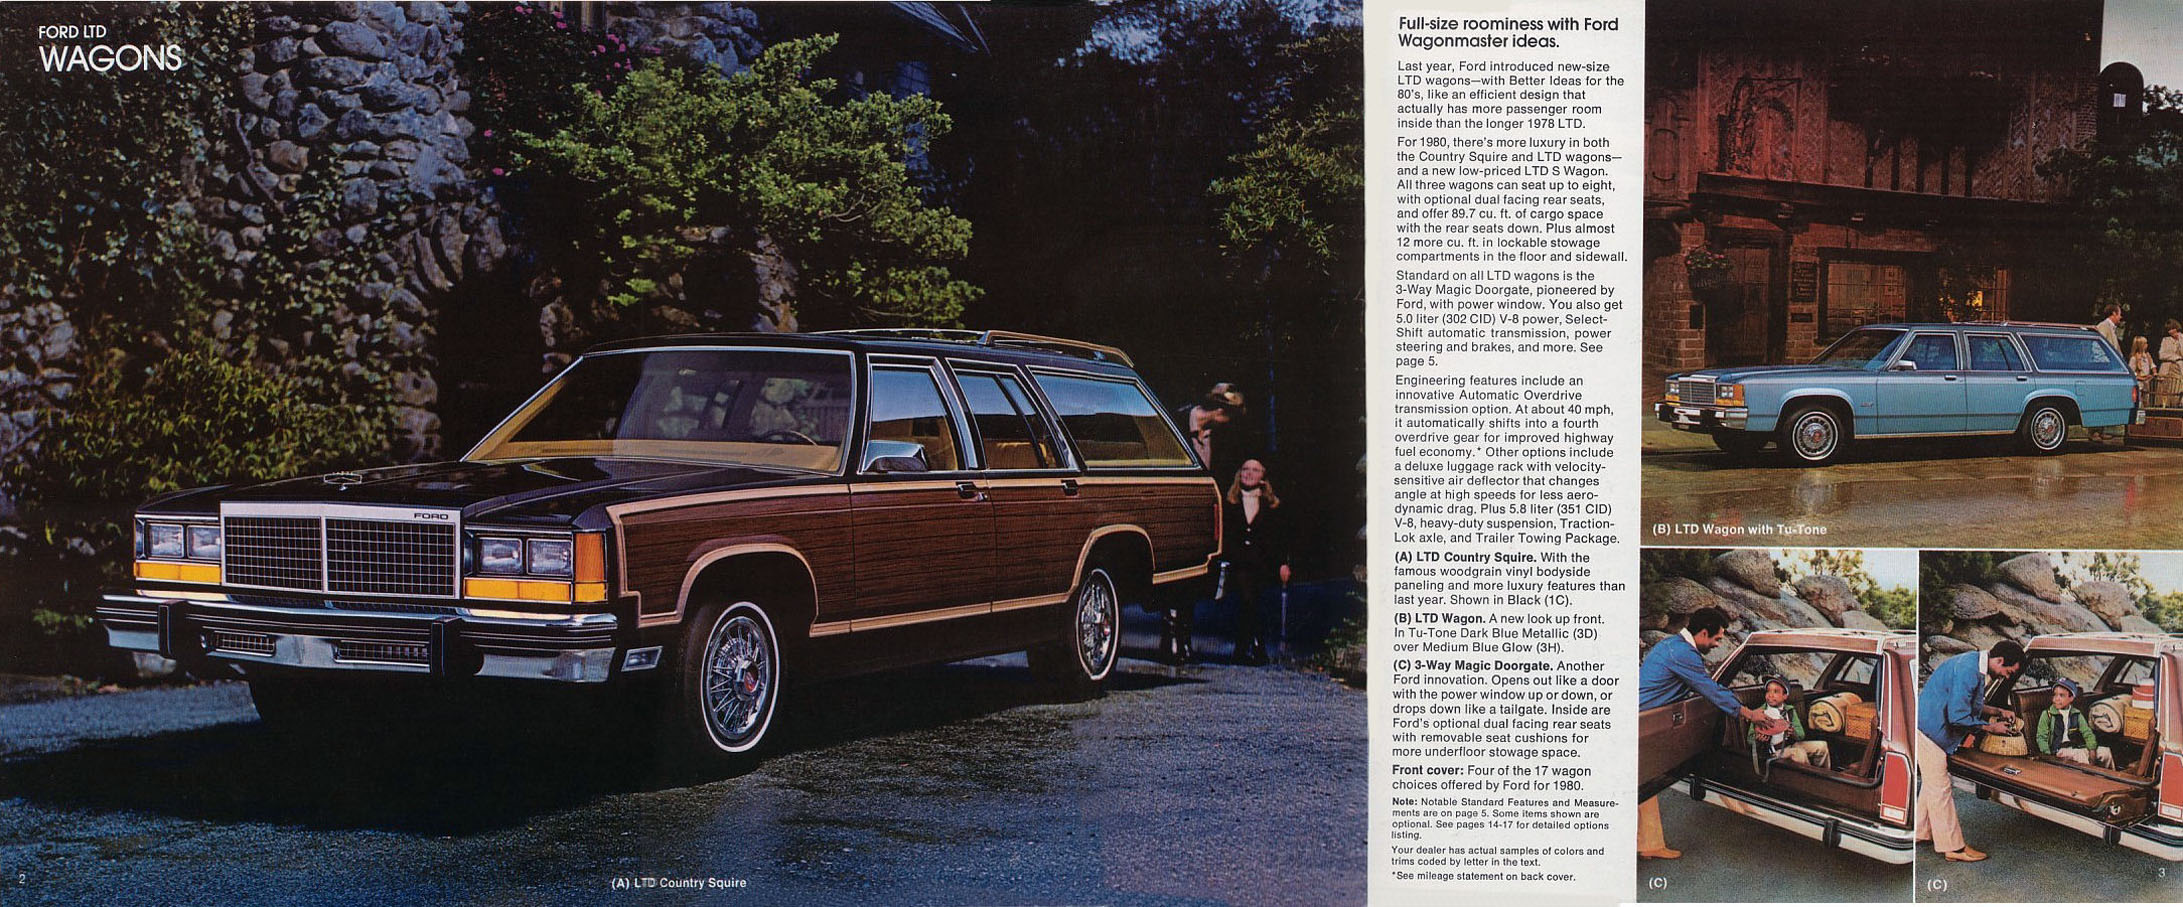 1980 Ford Wagons Brochure Page 11